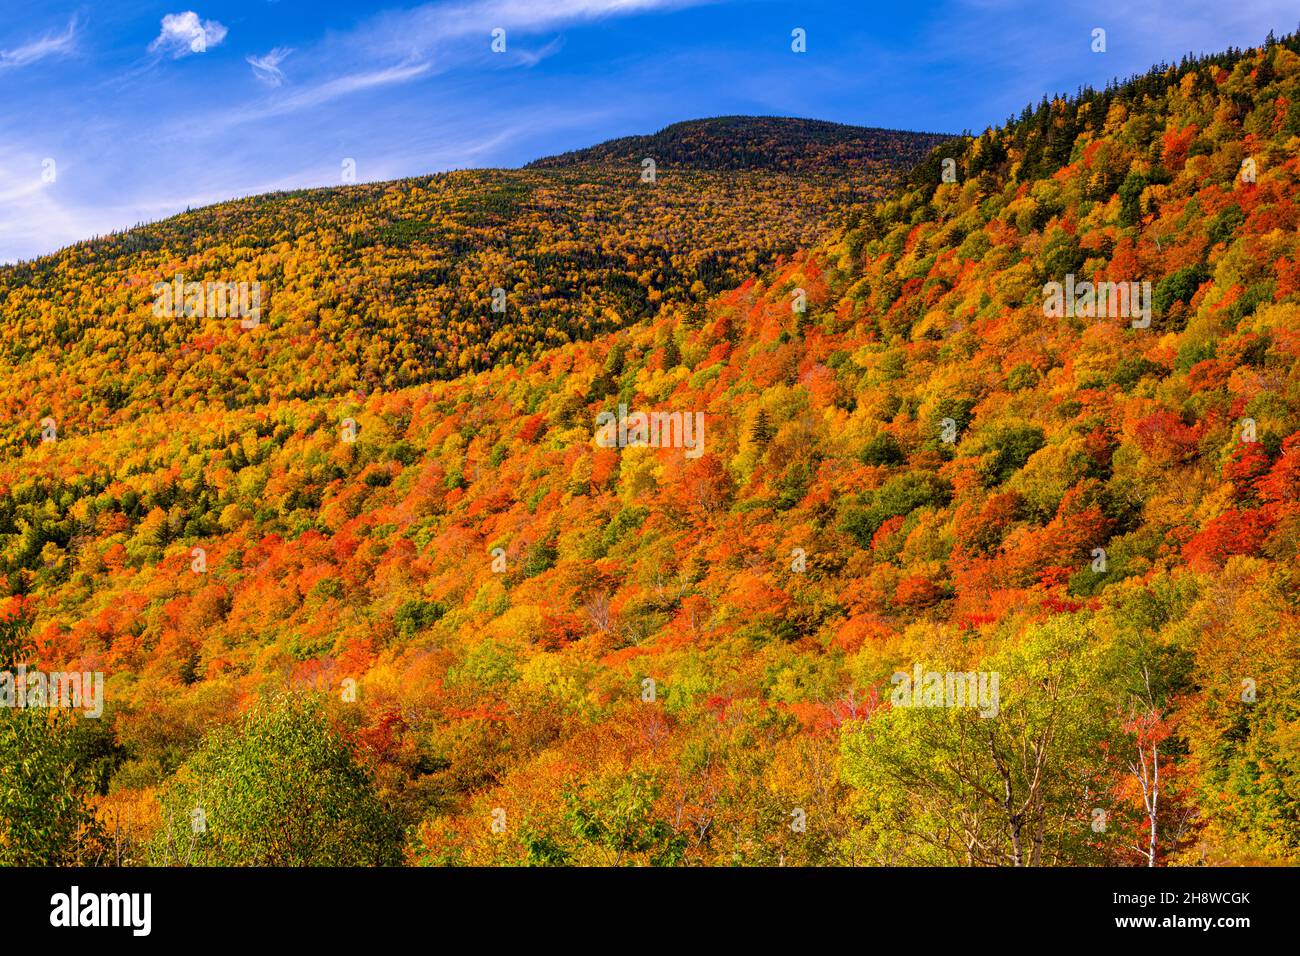 Autumn foliage in the deciduous forest on New England hillsides, Highway 16 near Pinkham Notch, New Hampshire, USA Stock Photo